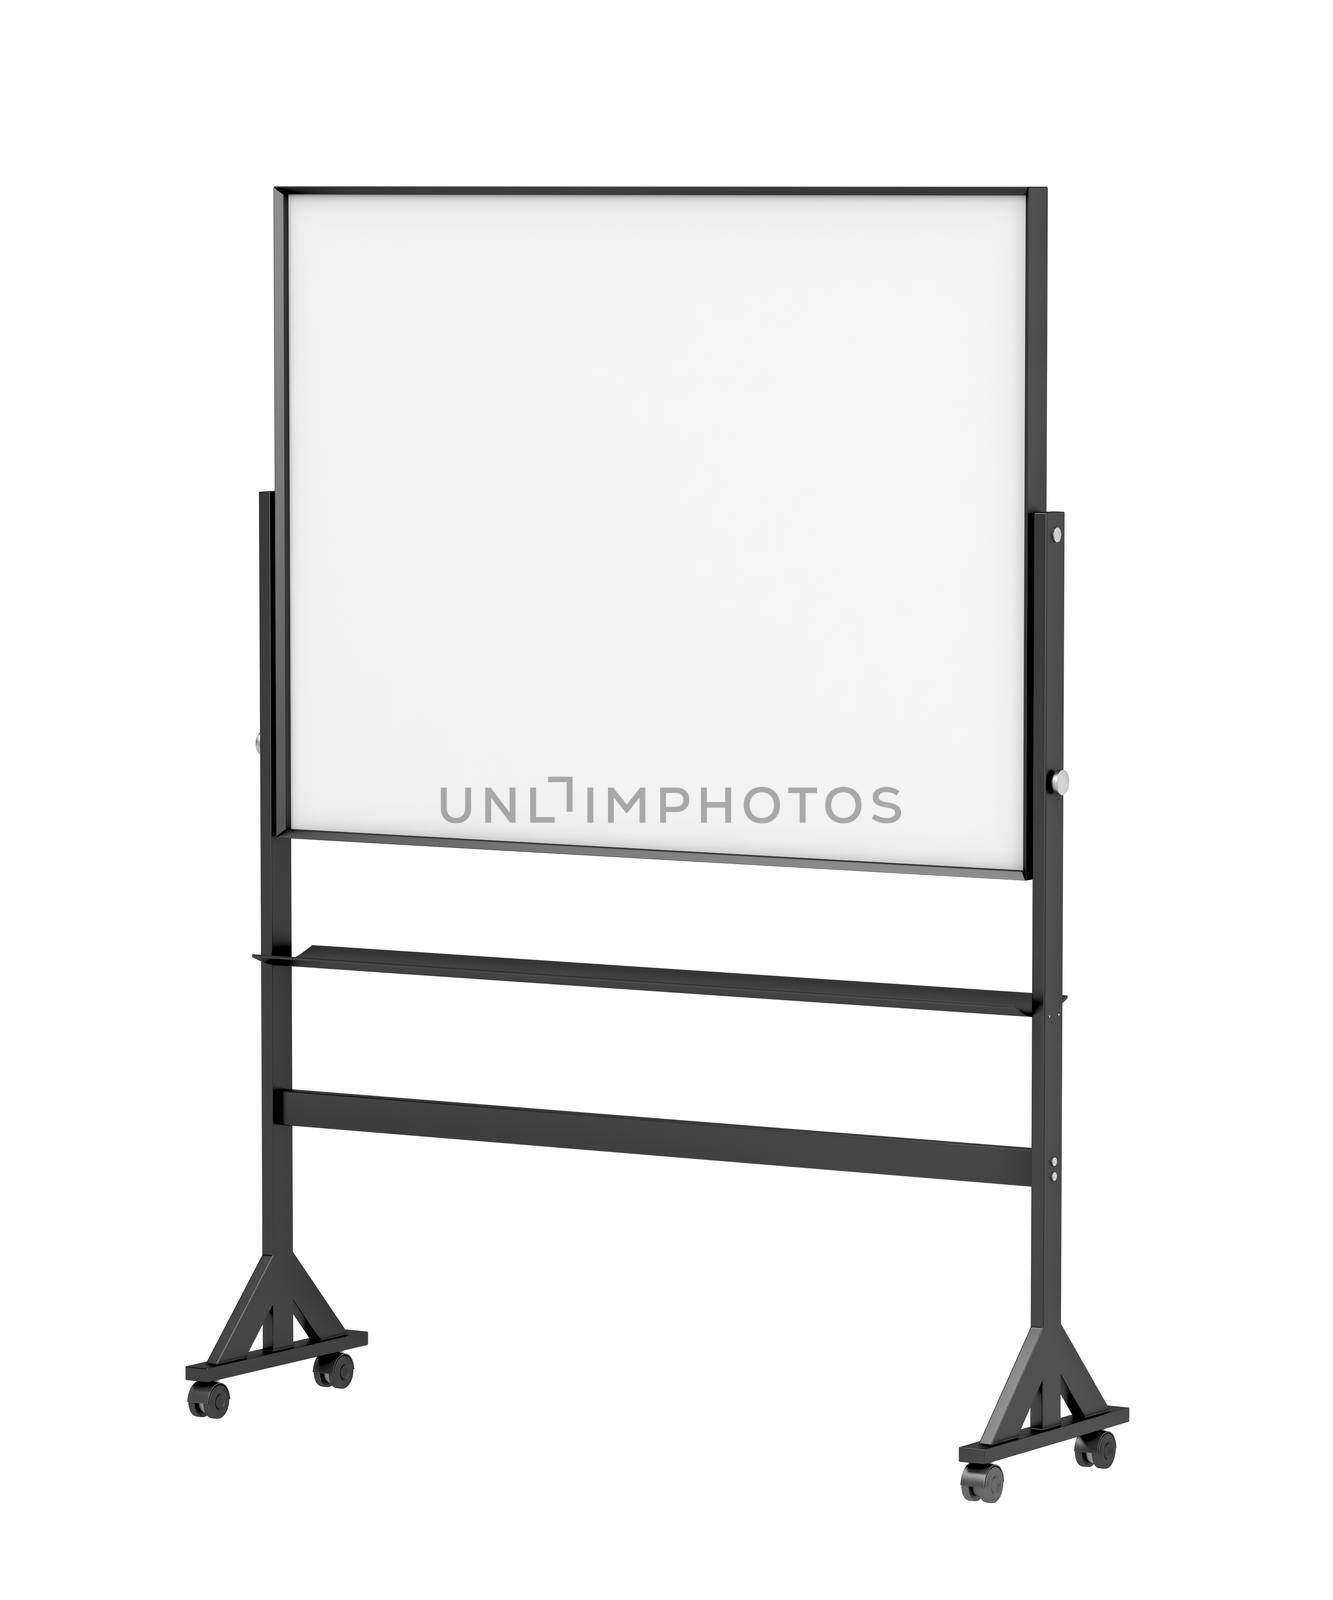 Mobile school whiteboard on wheels, isolated on white background